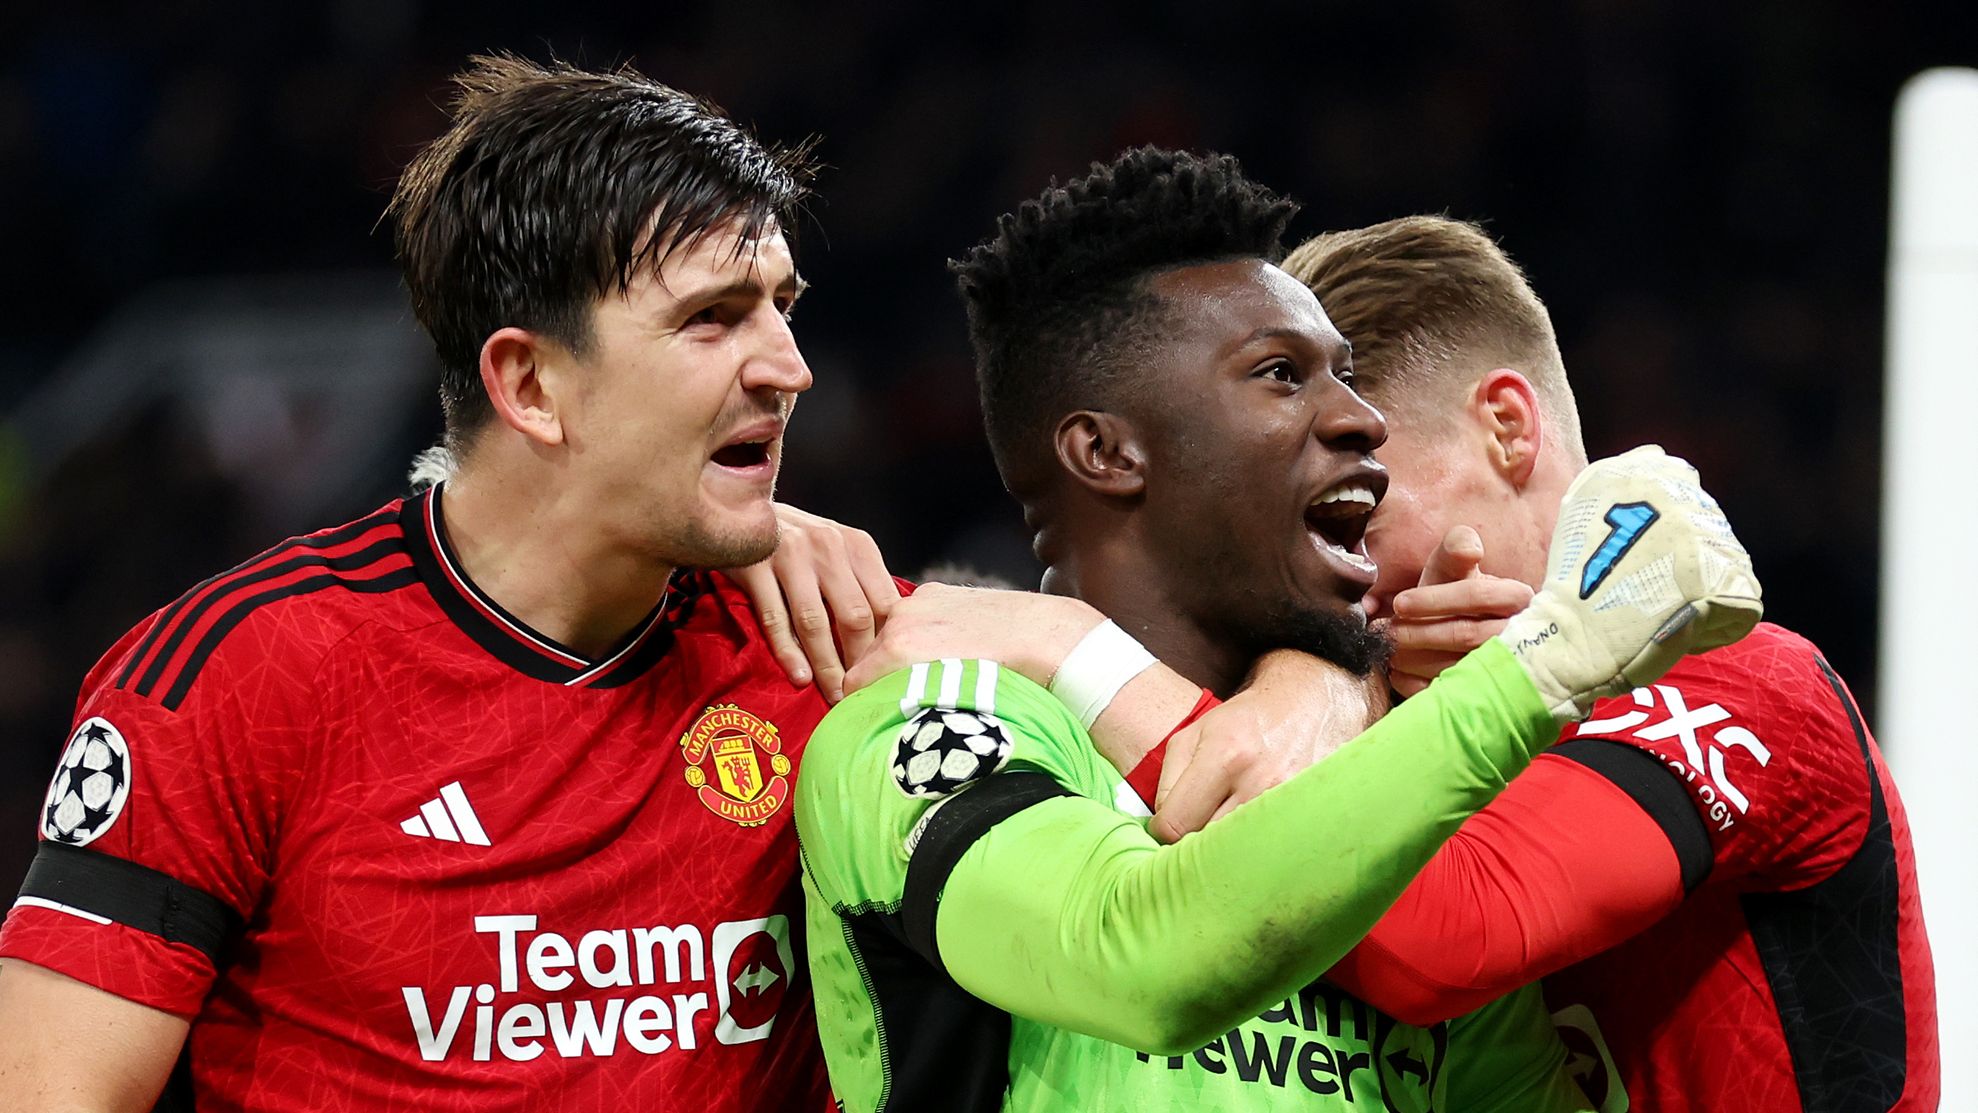 Andre Onana and Harry Maguire of Manchester United celebrate after saving a penalty from Jordan Larsson of FC Copenhagen during the UEFA Champions League match at Old Trafford.